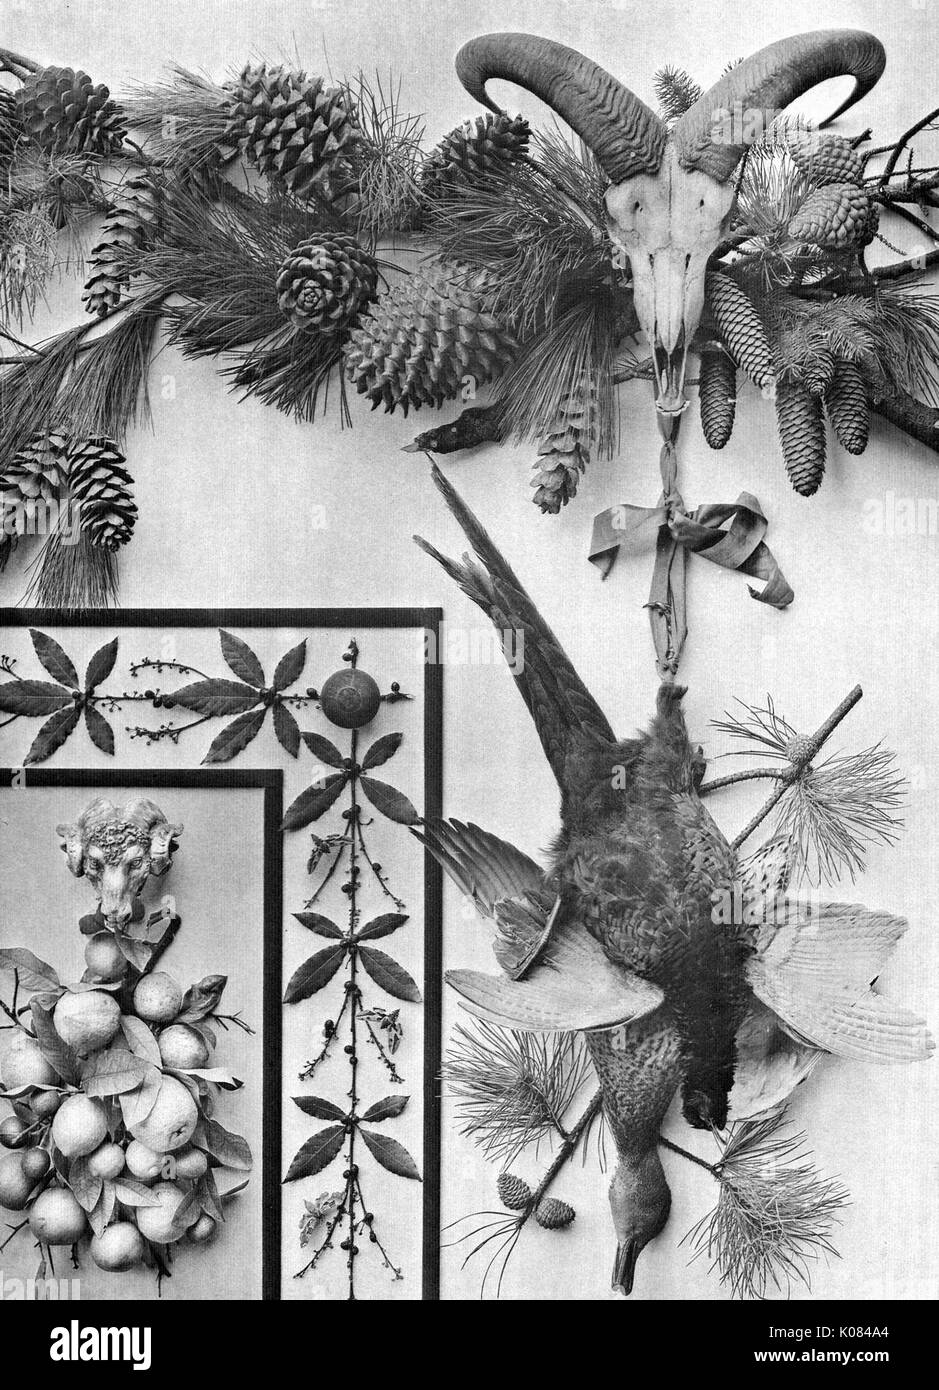 Variety of vegetation from pine leaves with pine cones, plants with small berries and plant with apples, ram skull and ram ornament, ram's skull carrying two birds, 1900. Stock Photo